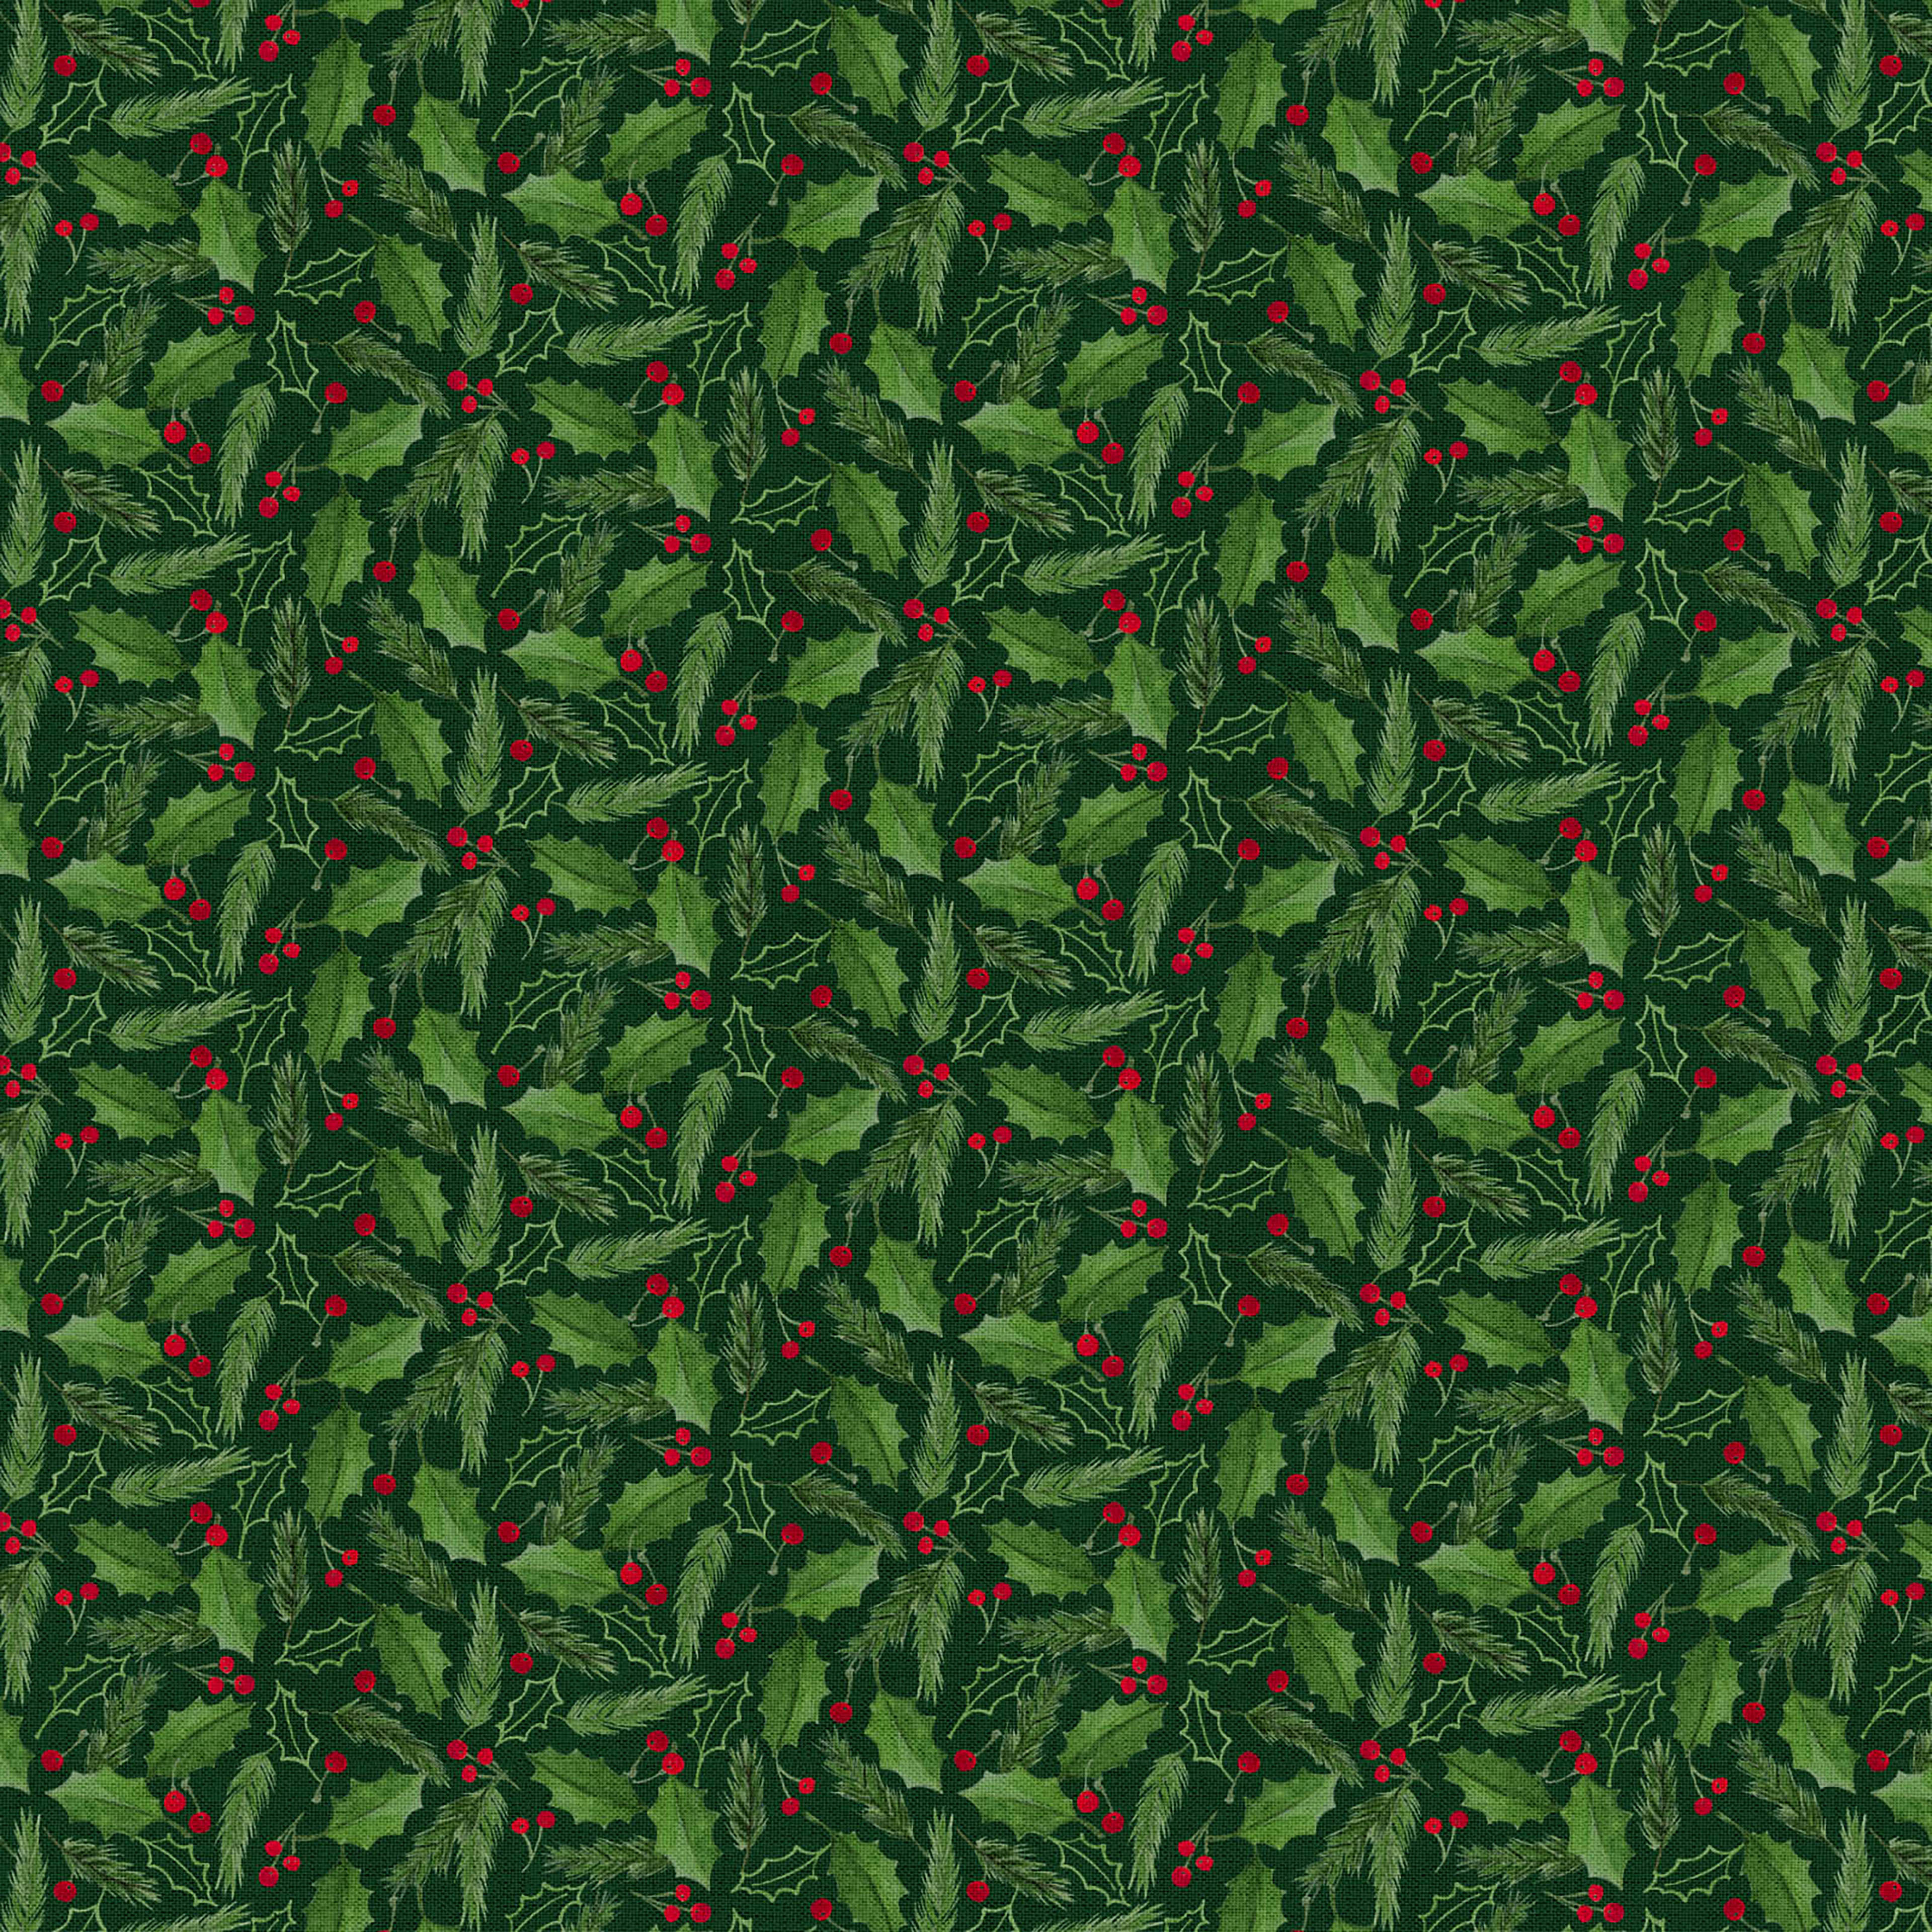 Fabric Editions Green Holly &#x26; Berries Cotton Fabric